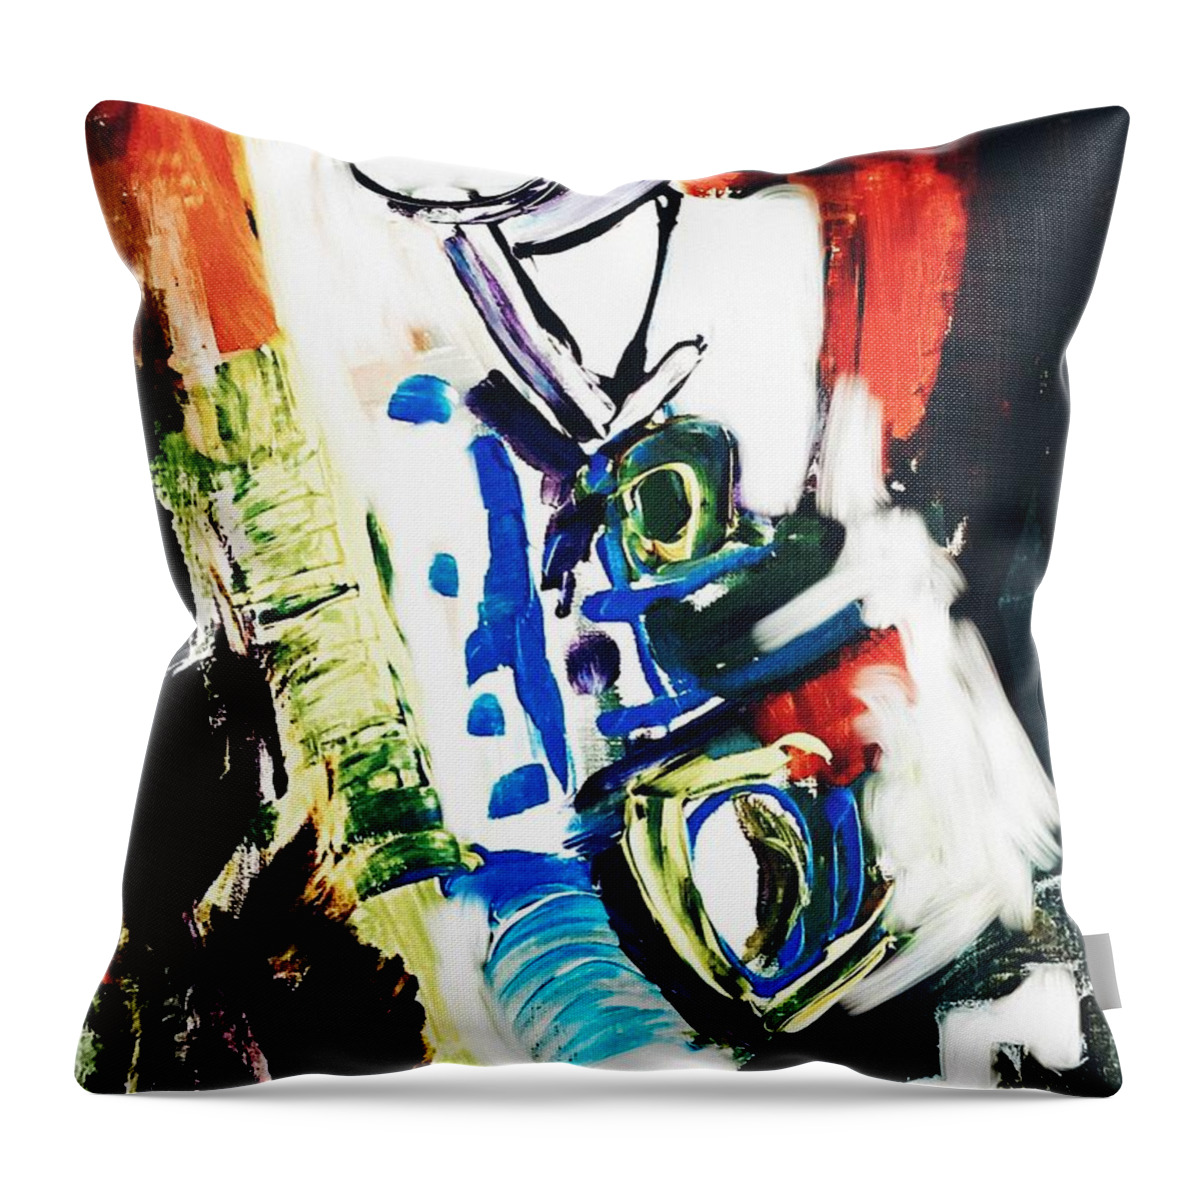 Contemporary Art Throw Pillow featuring the painting We are held within them by Jeremiah Ray